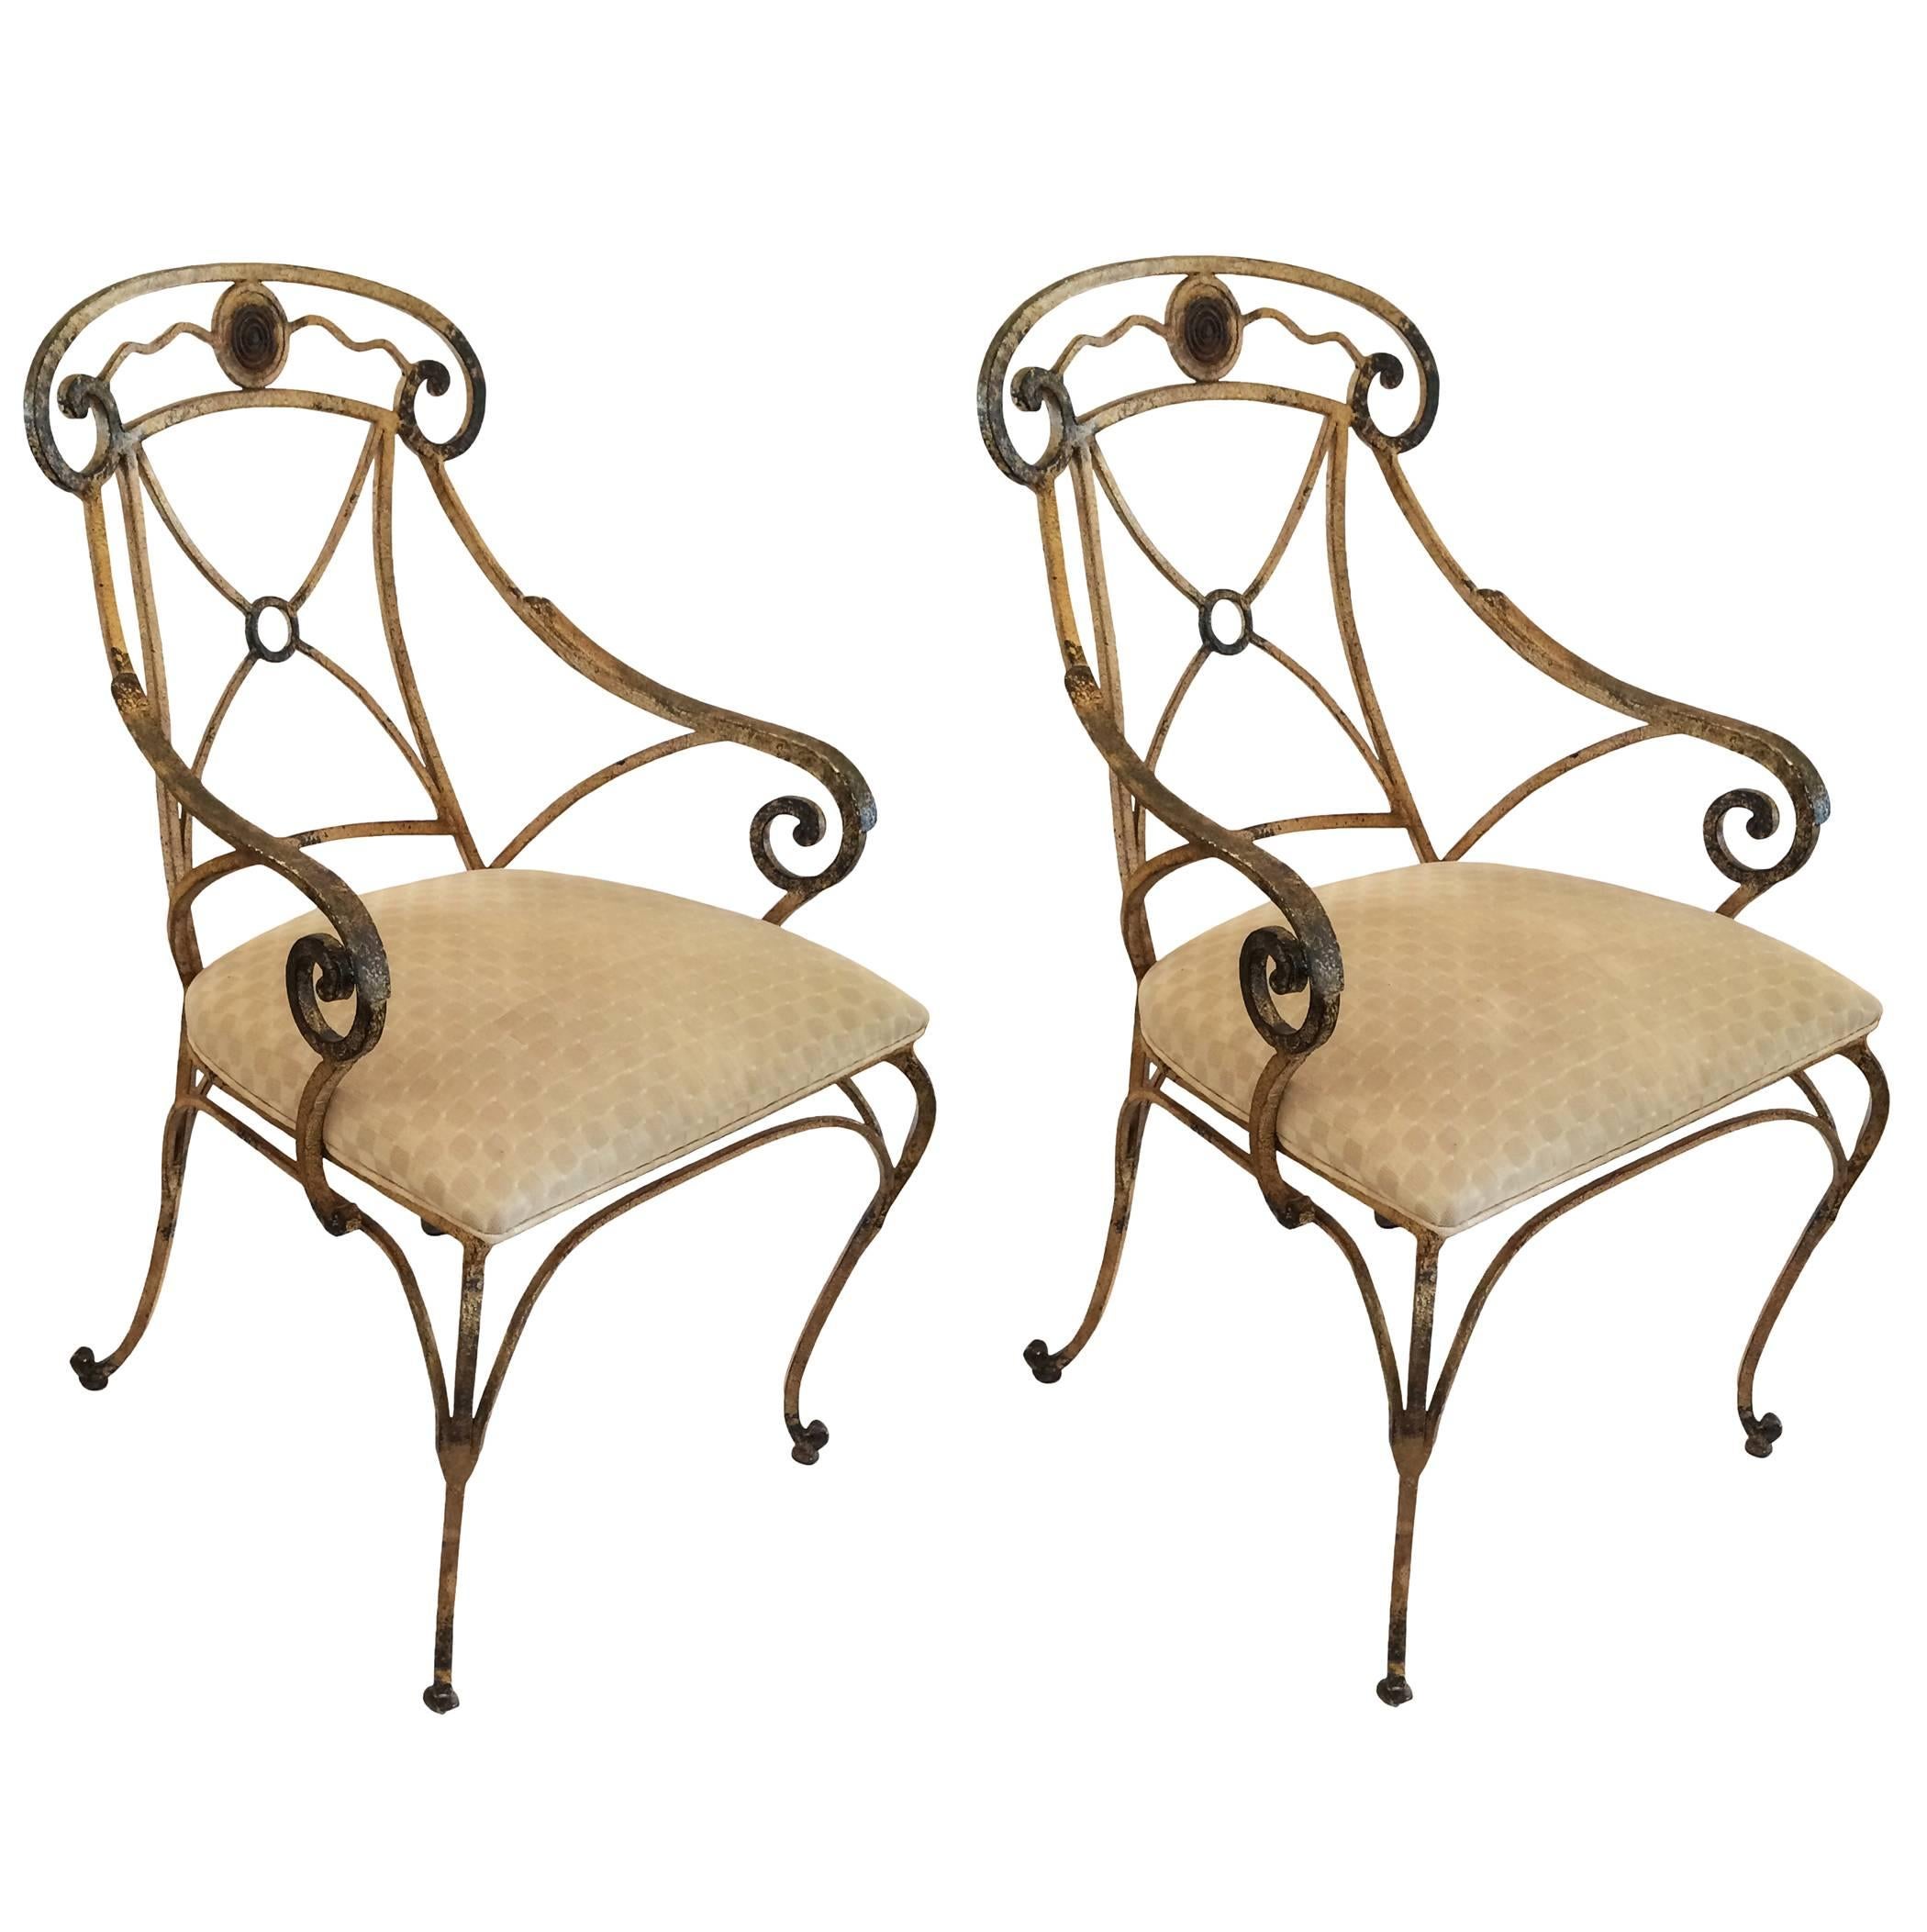 Fabric Set of Neoclassical Style Garden Chairs